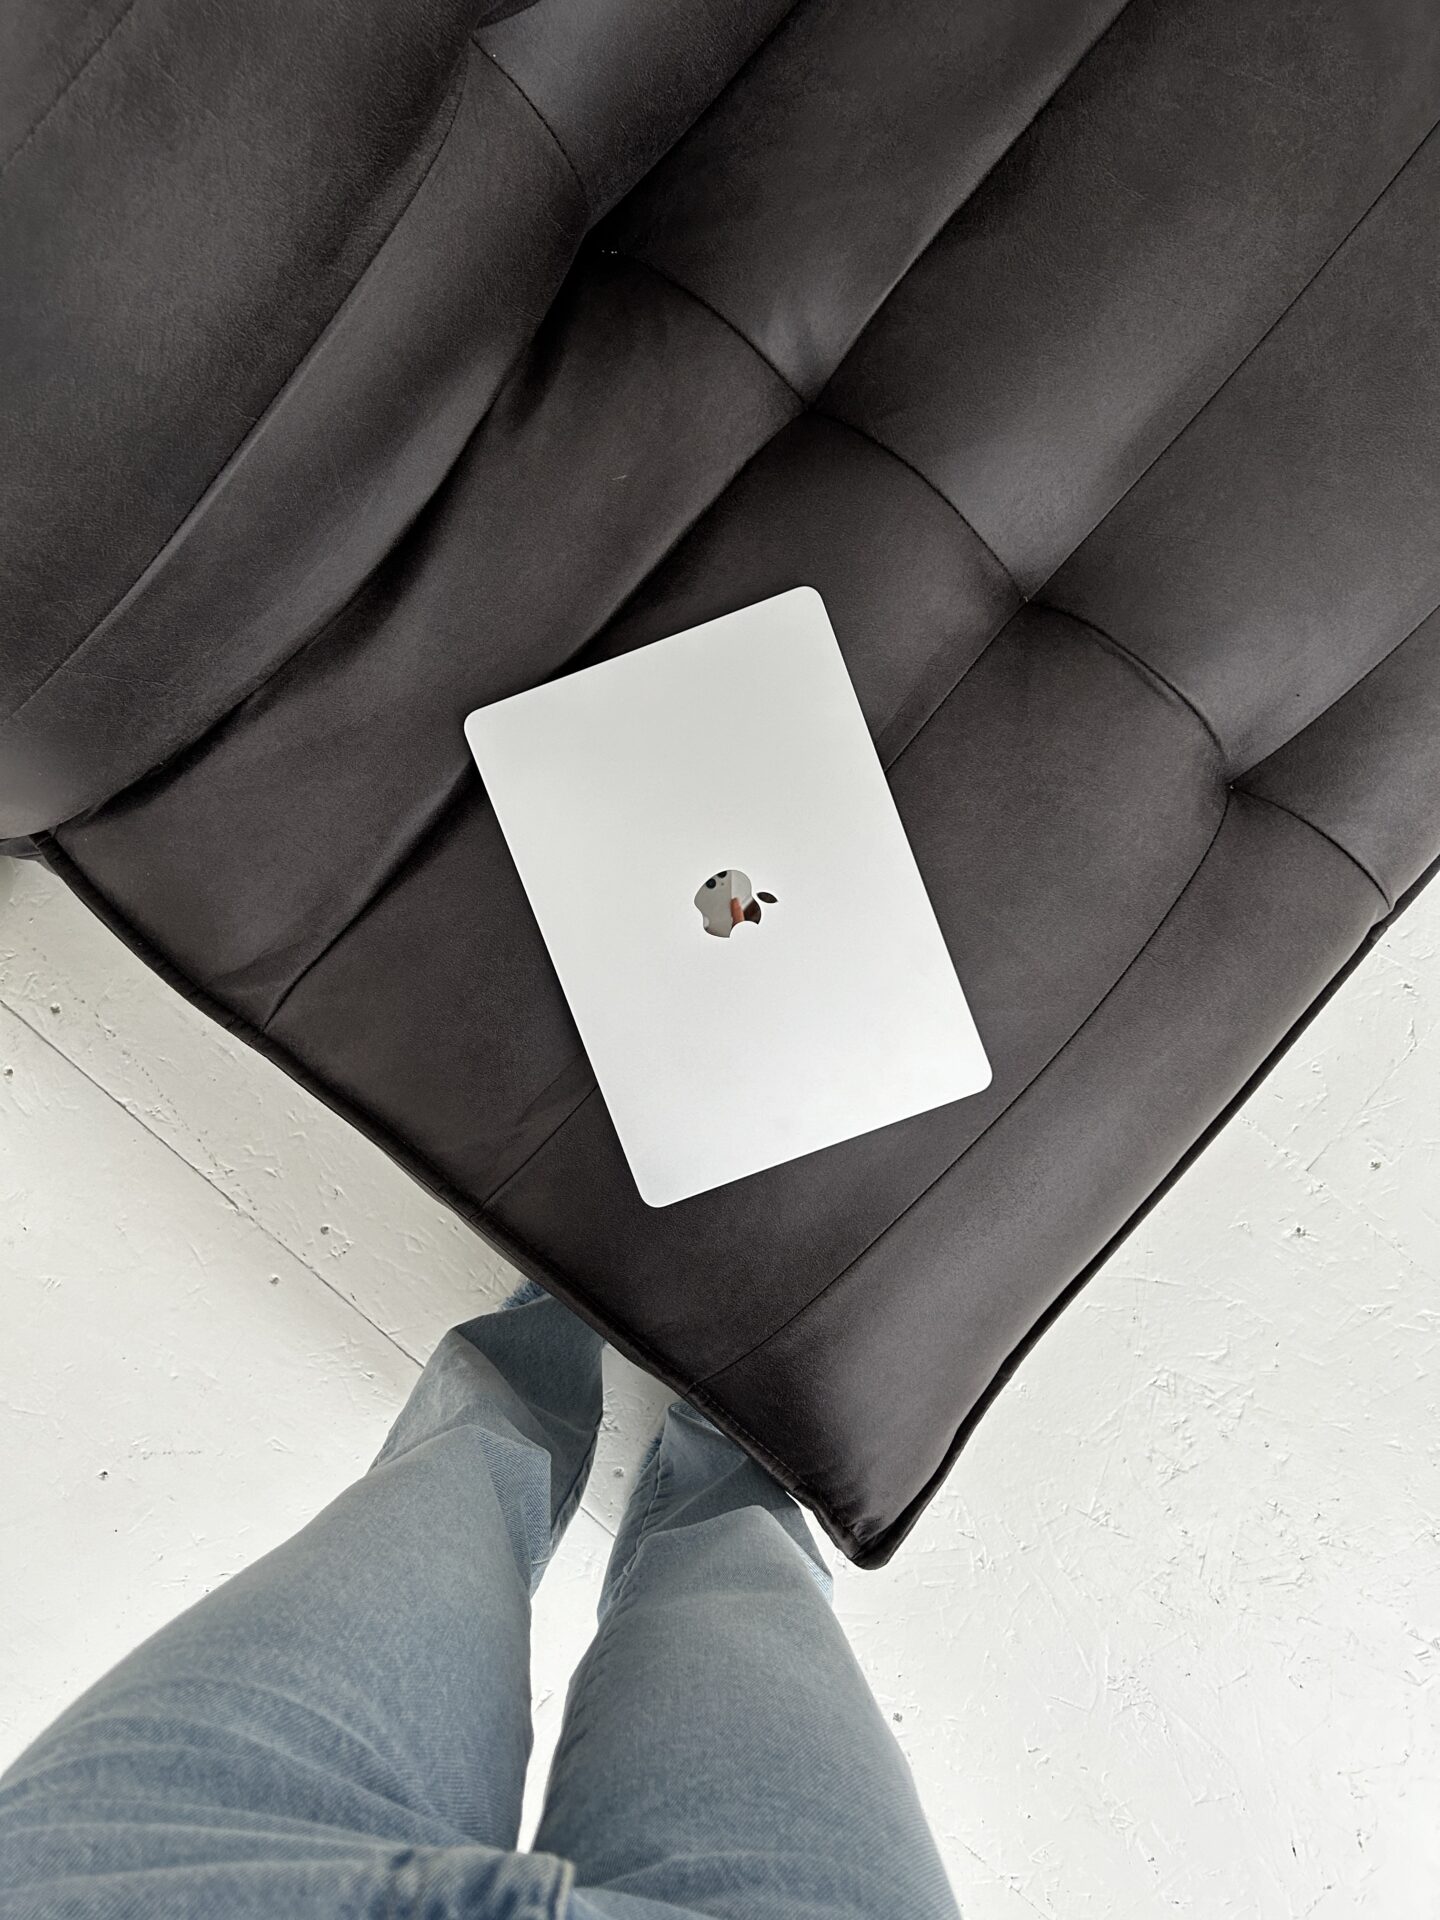 pov of woman standing looking down at closed macbook on black chair